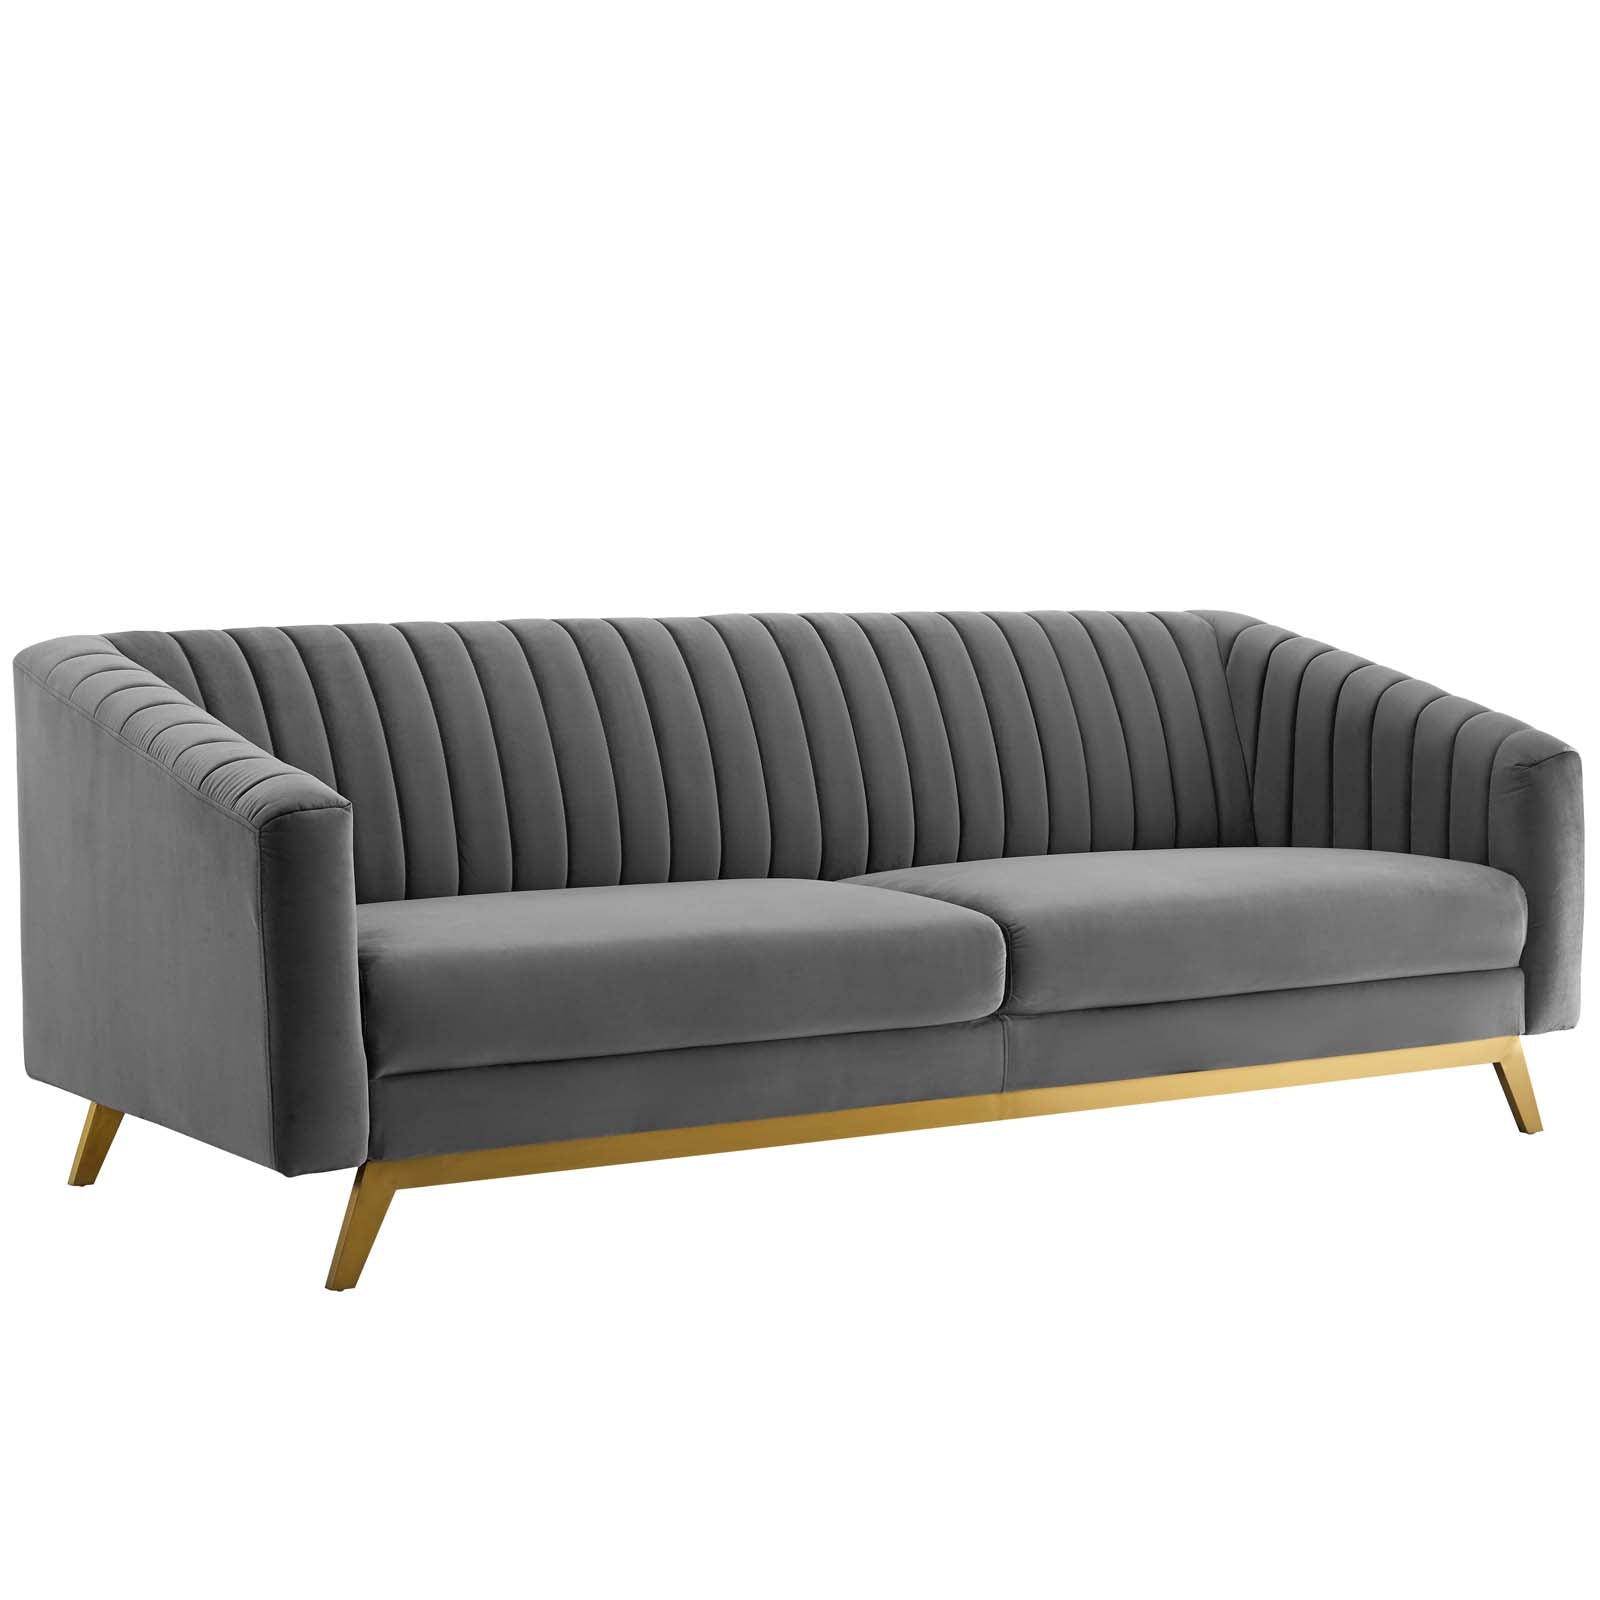 Modway Sofas & Couches - Valiant Vertical Channel Tufted Performance Velvet Sofa Gray